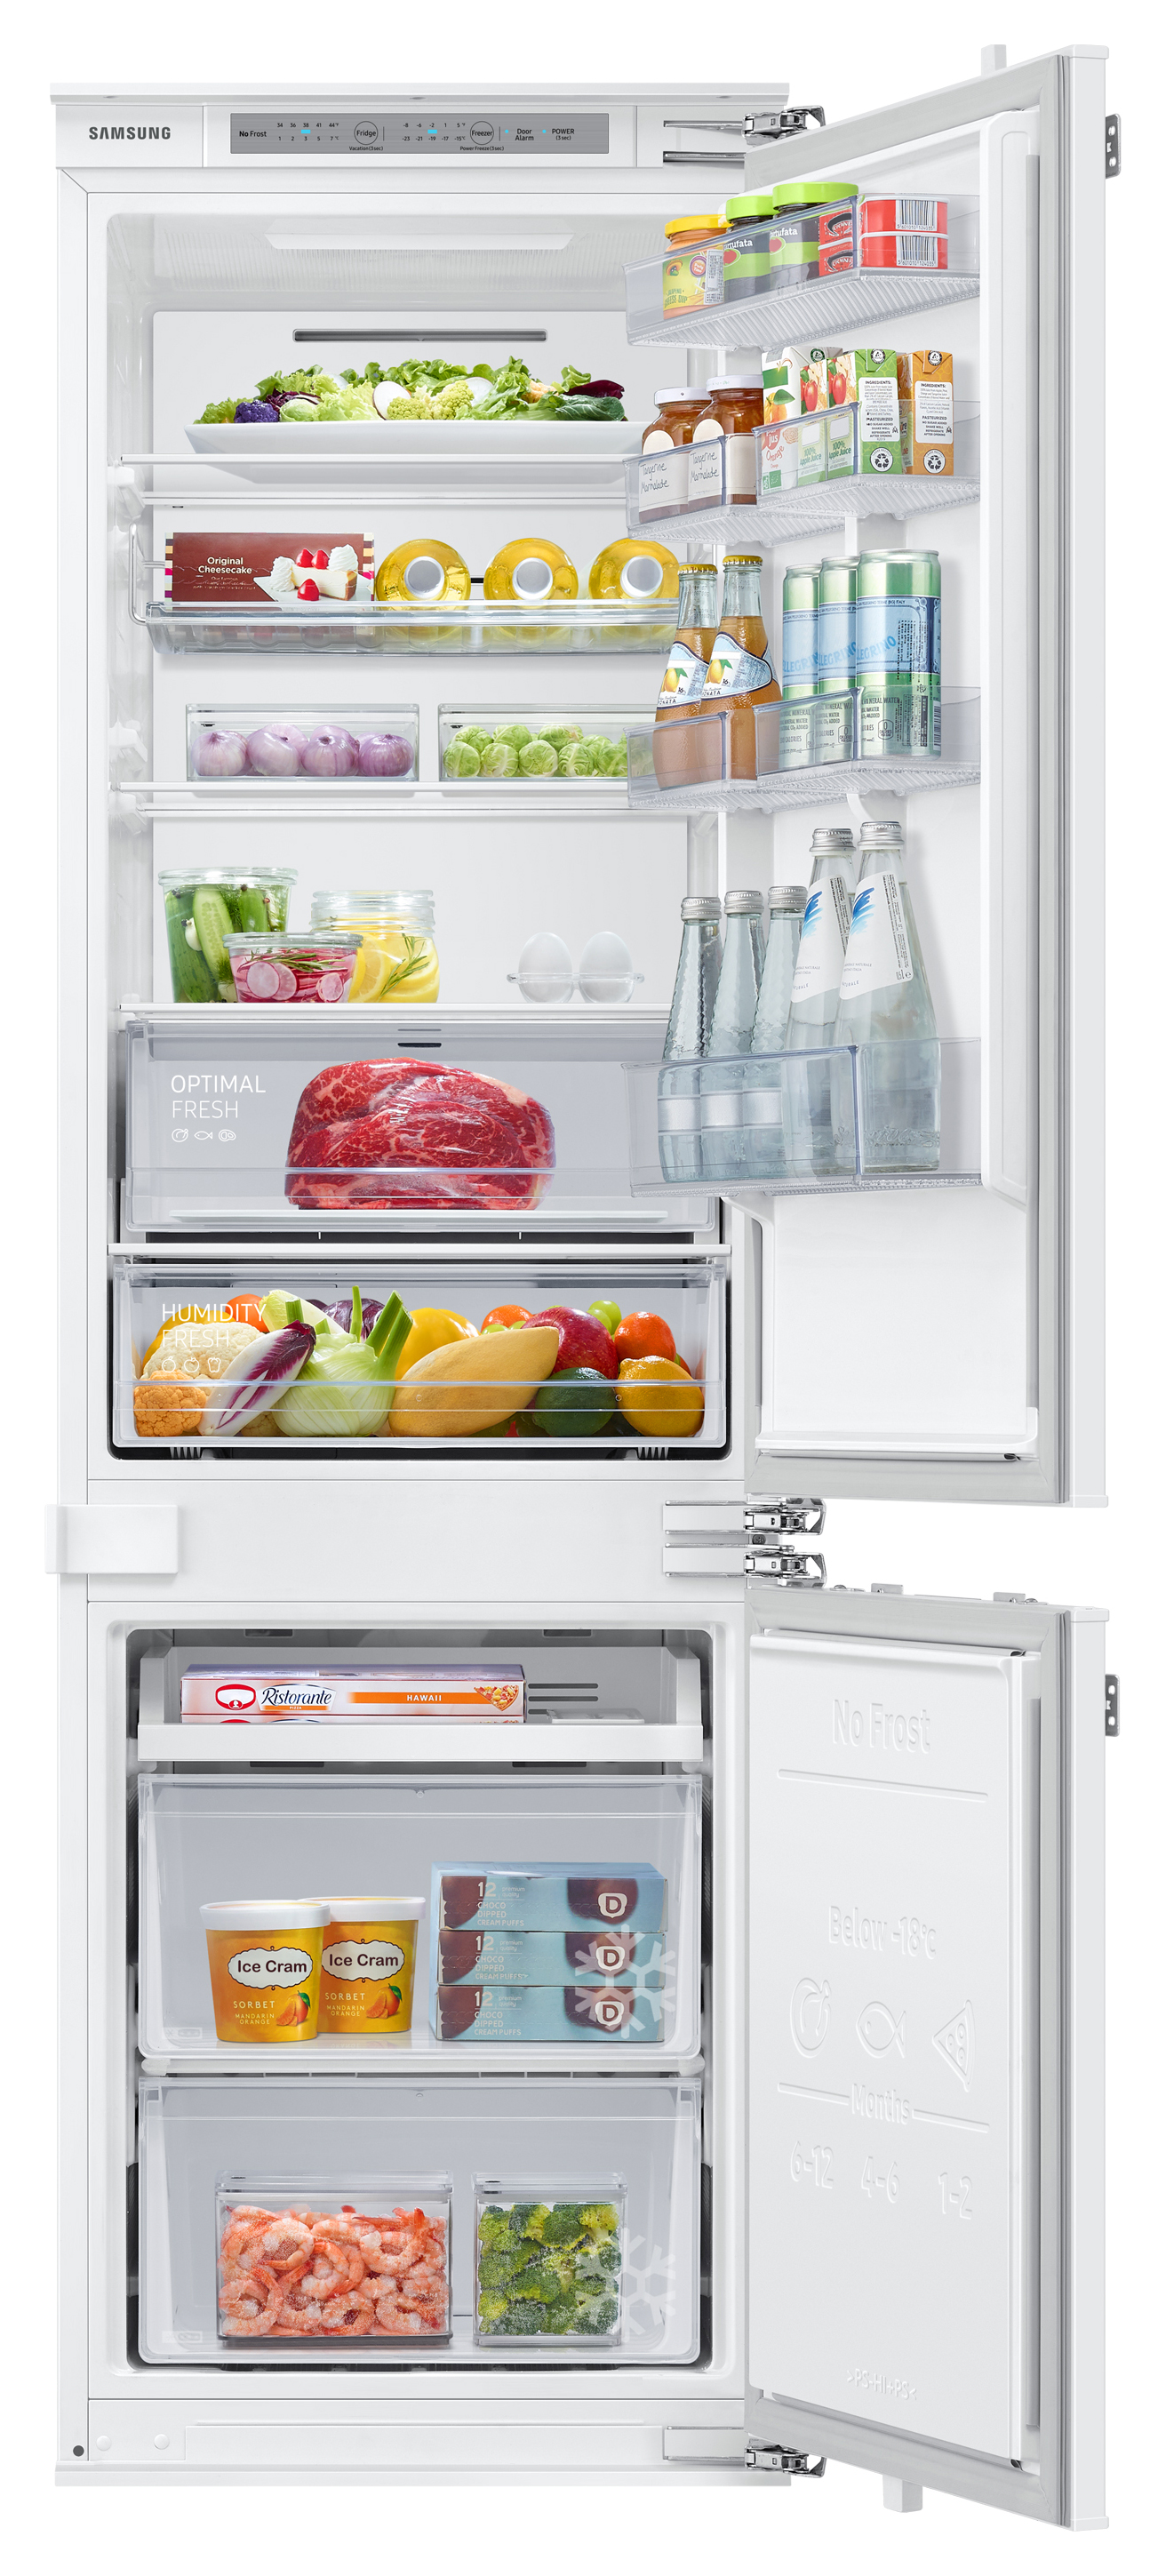 Image of Samsung BRB26615EWW/EU Built In Fridge Freezer with SpaceMax™ Technology - White